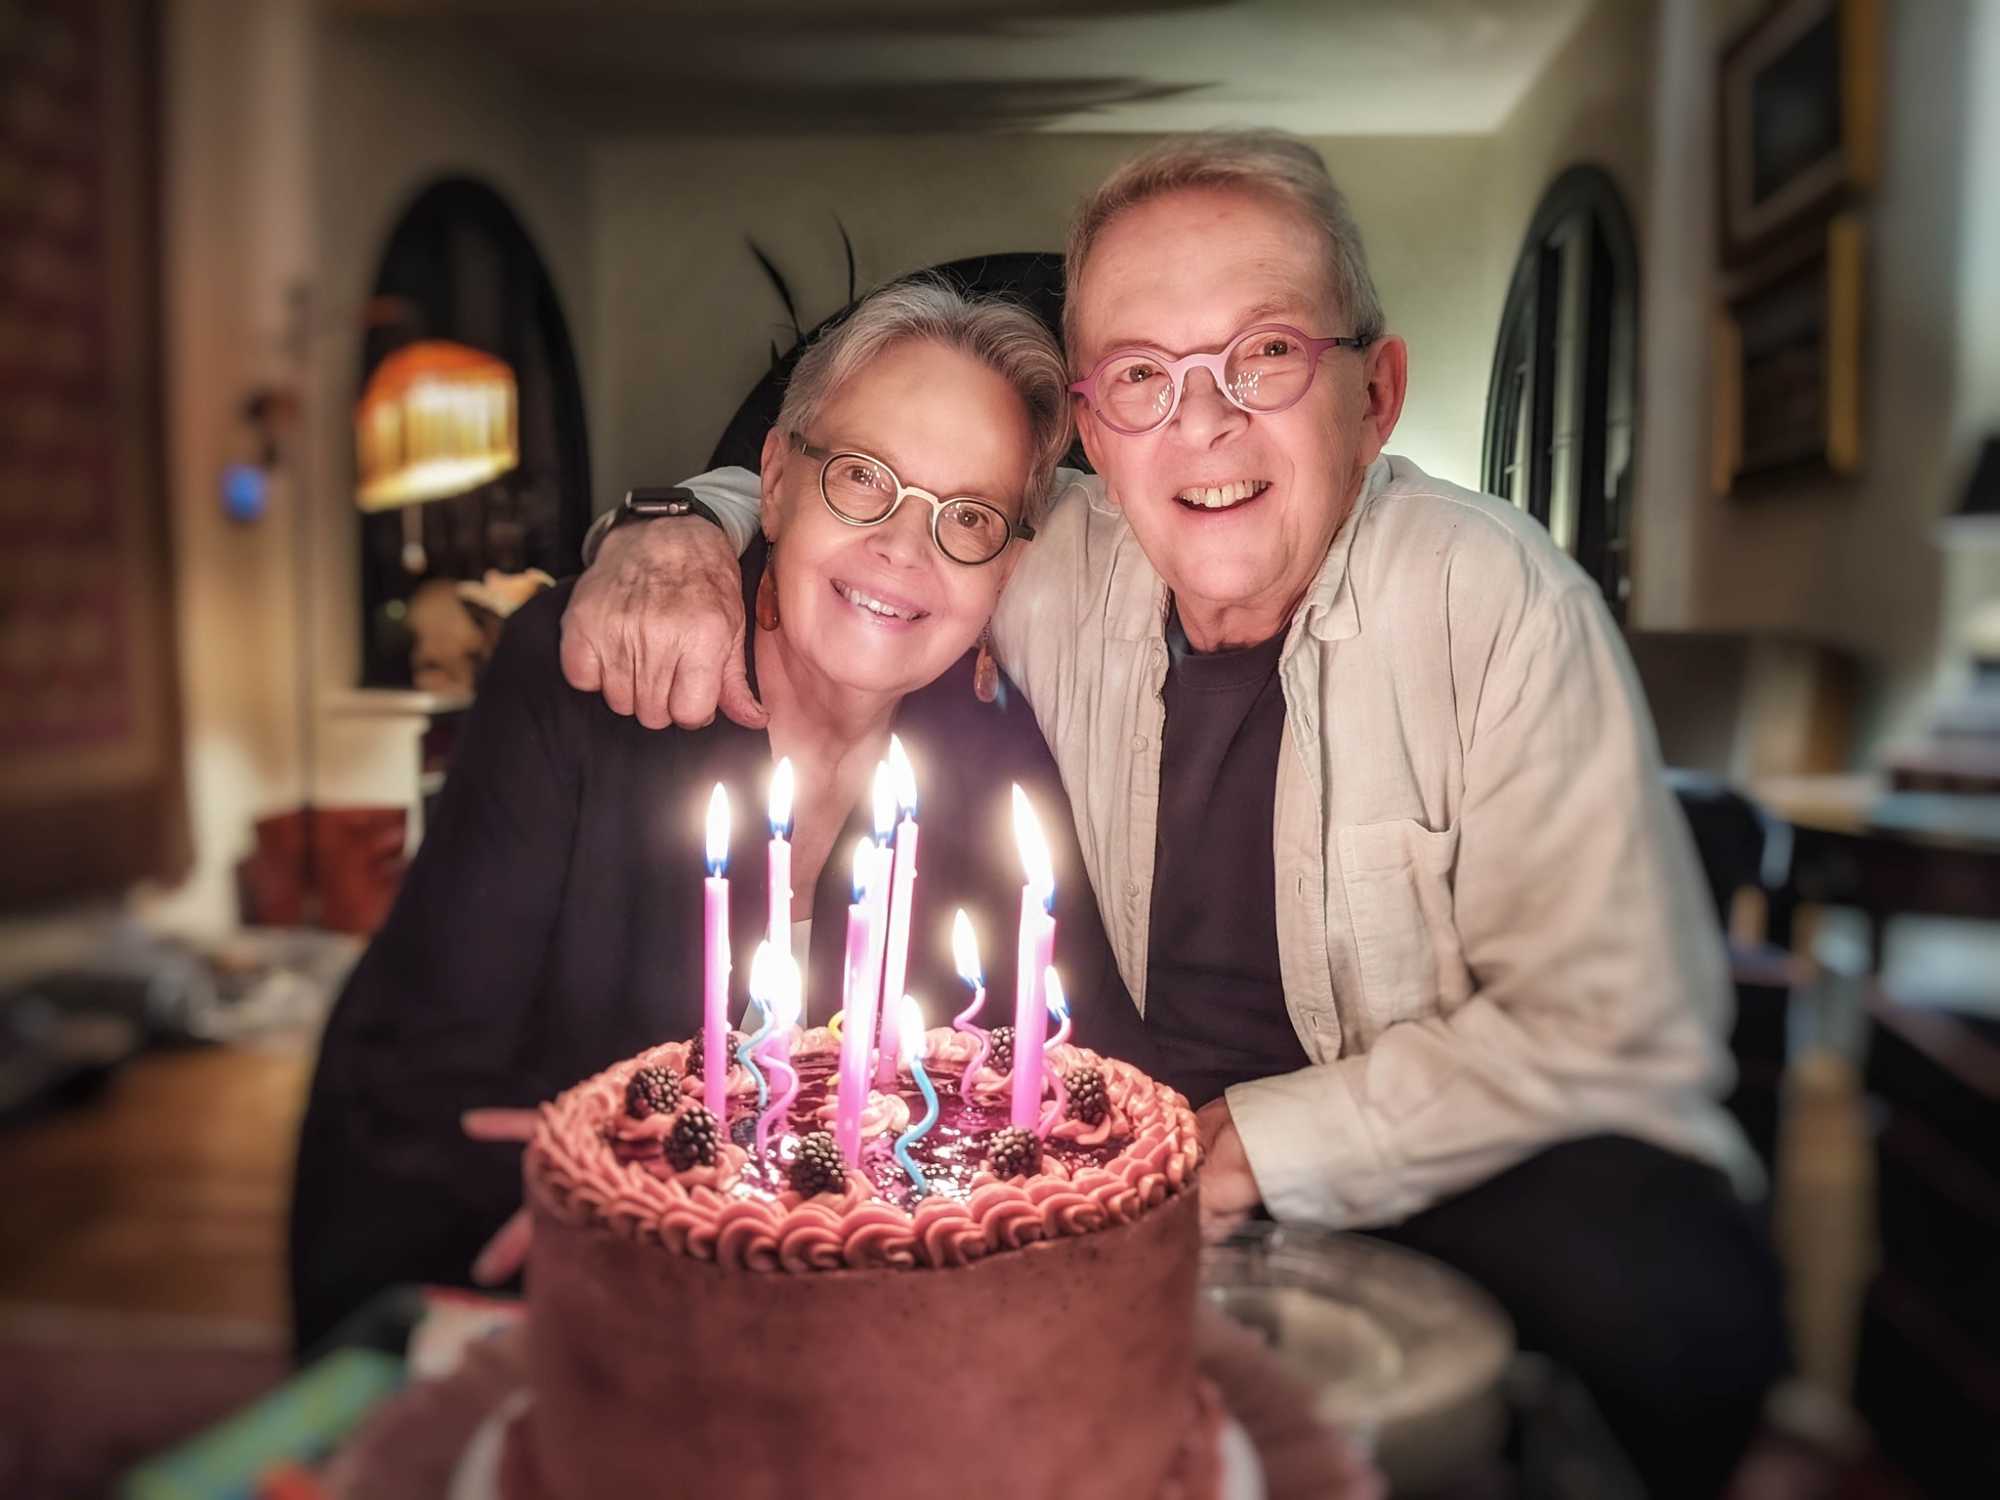 Morris Eaves with his arm around wife Georgia and a birthday cake in the foreground.